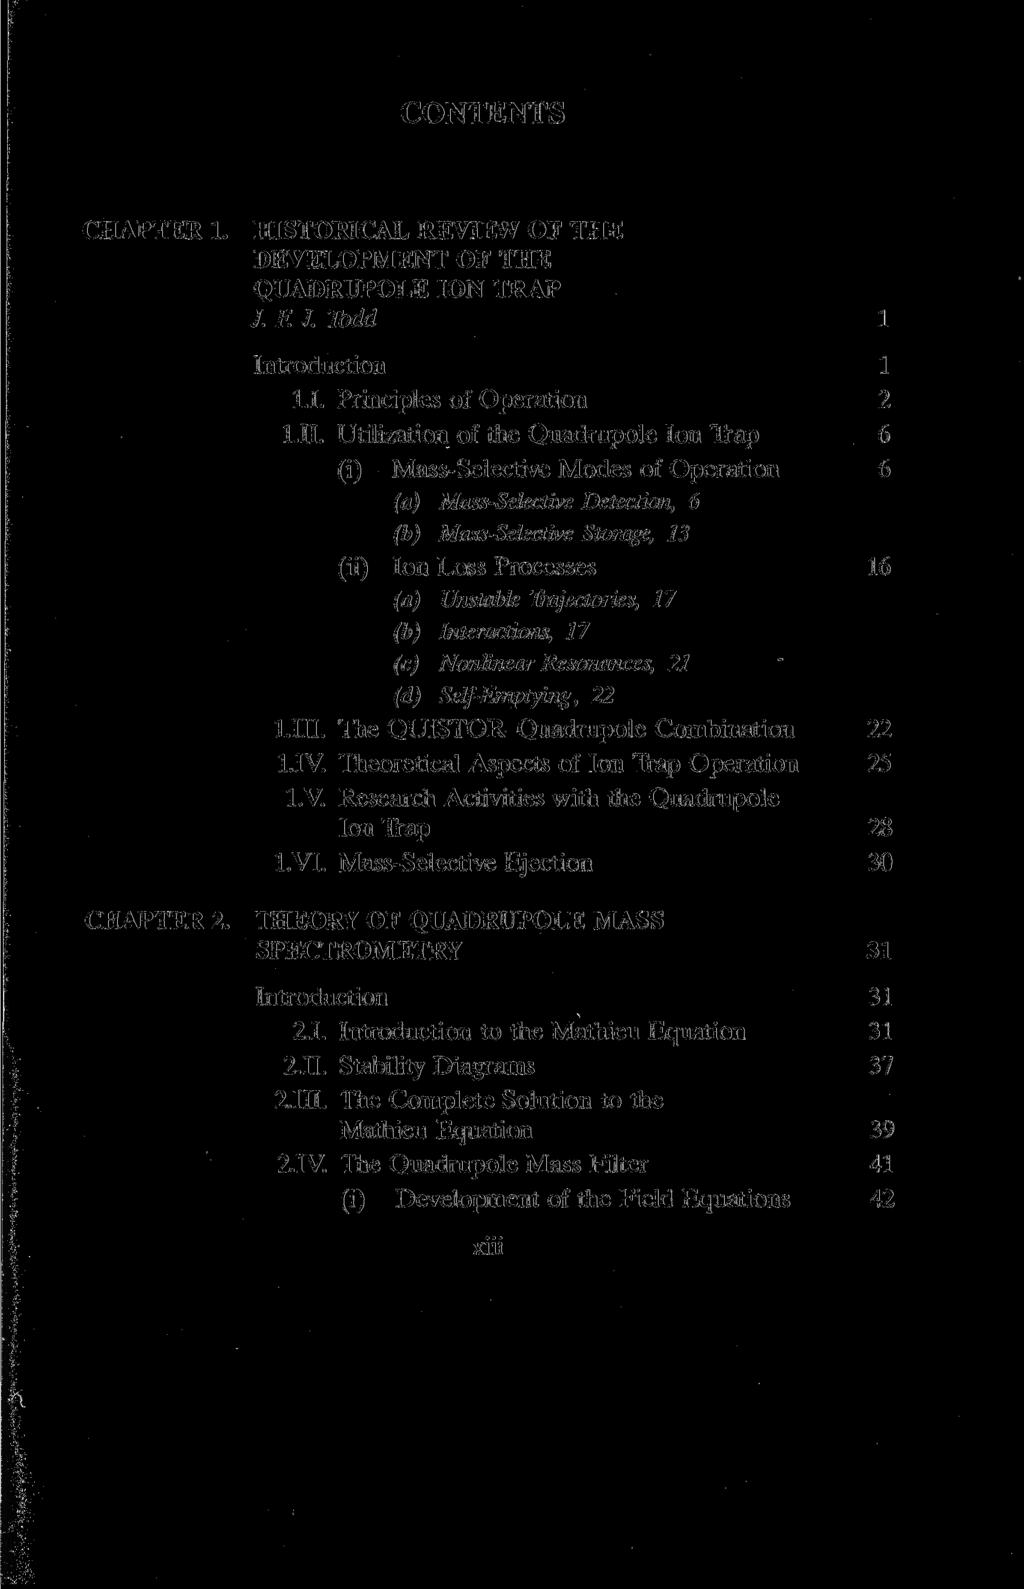 CONTENTS CHAPTER 1. HISTORICAL REVIEW OF THE DEVELOPMENT OF THE QUADRUPOLE ION TRAP /. F. J. Todd 1 Introduction 1 1.1. Principles of Operation 2 l.ii.